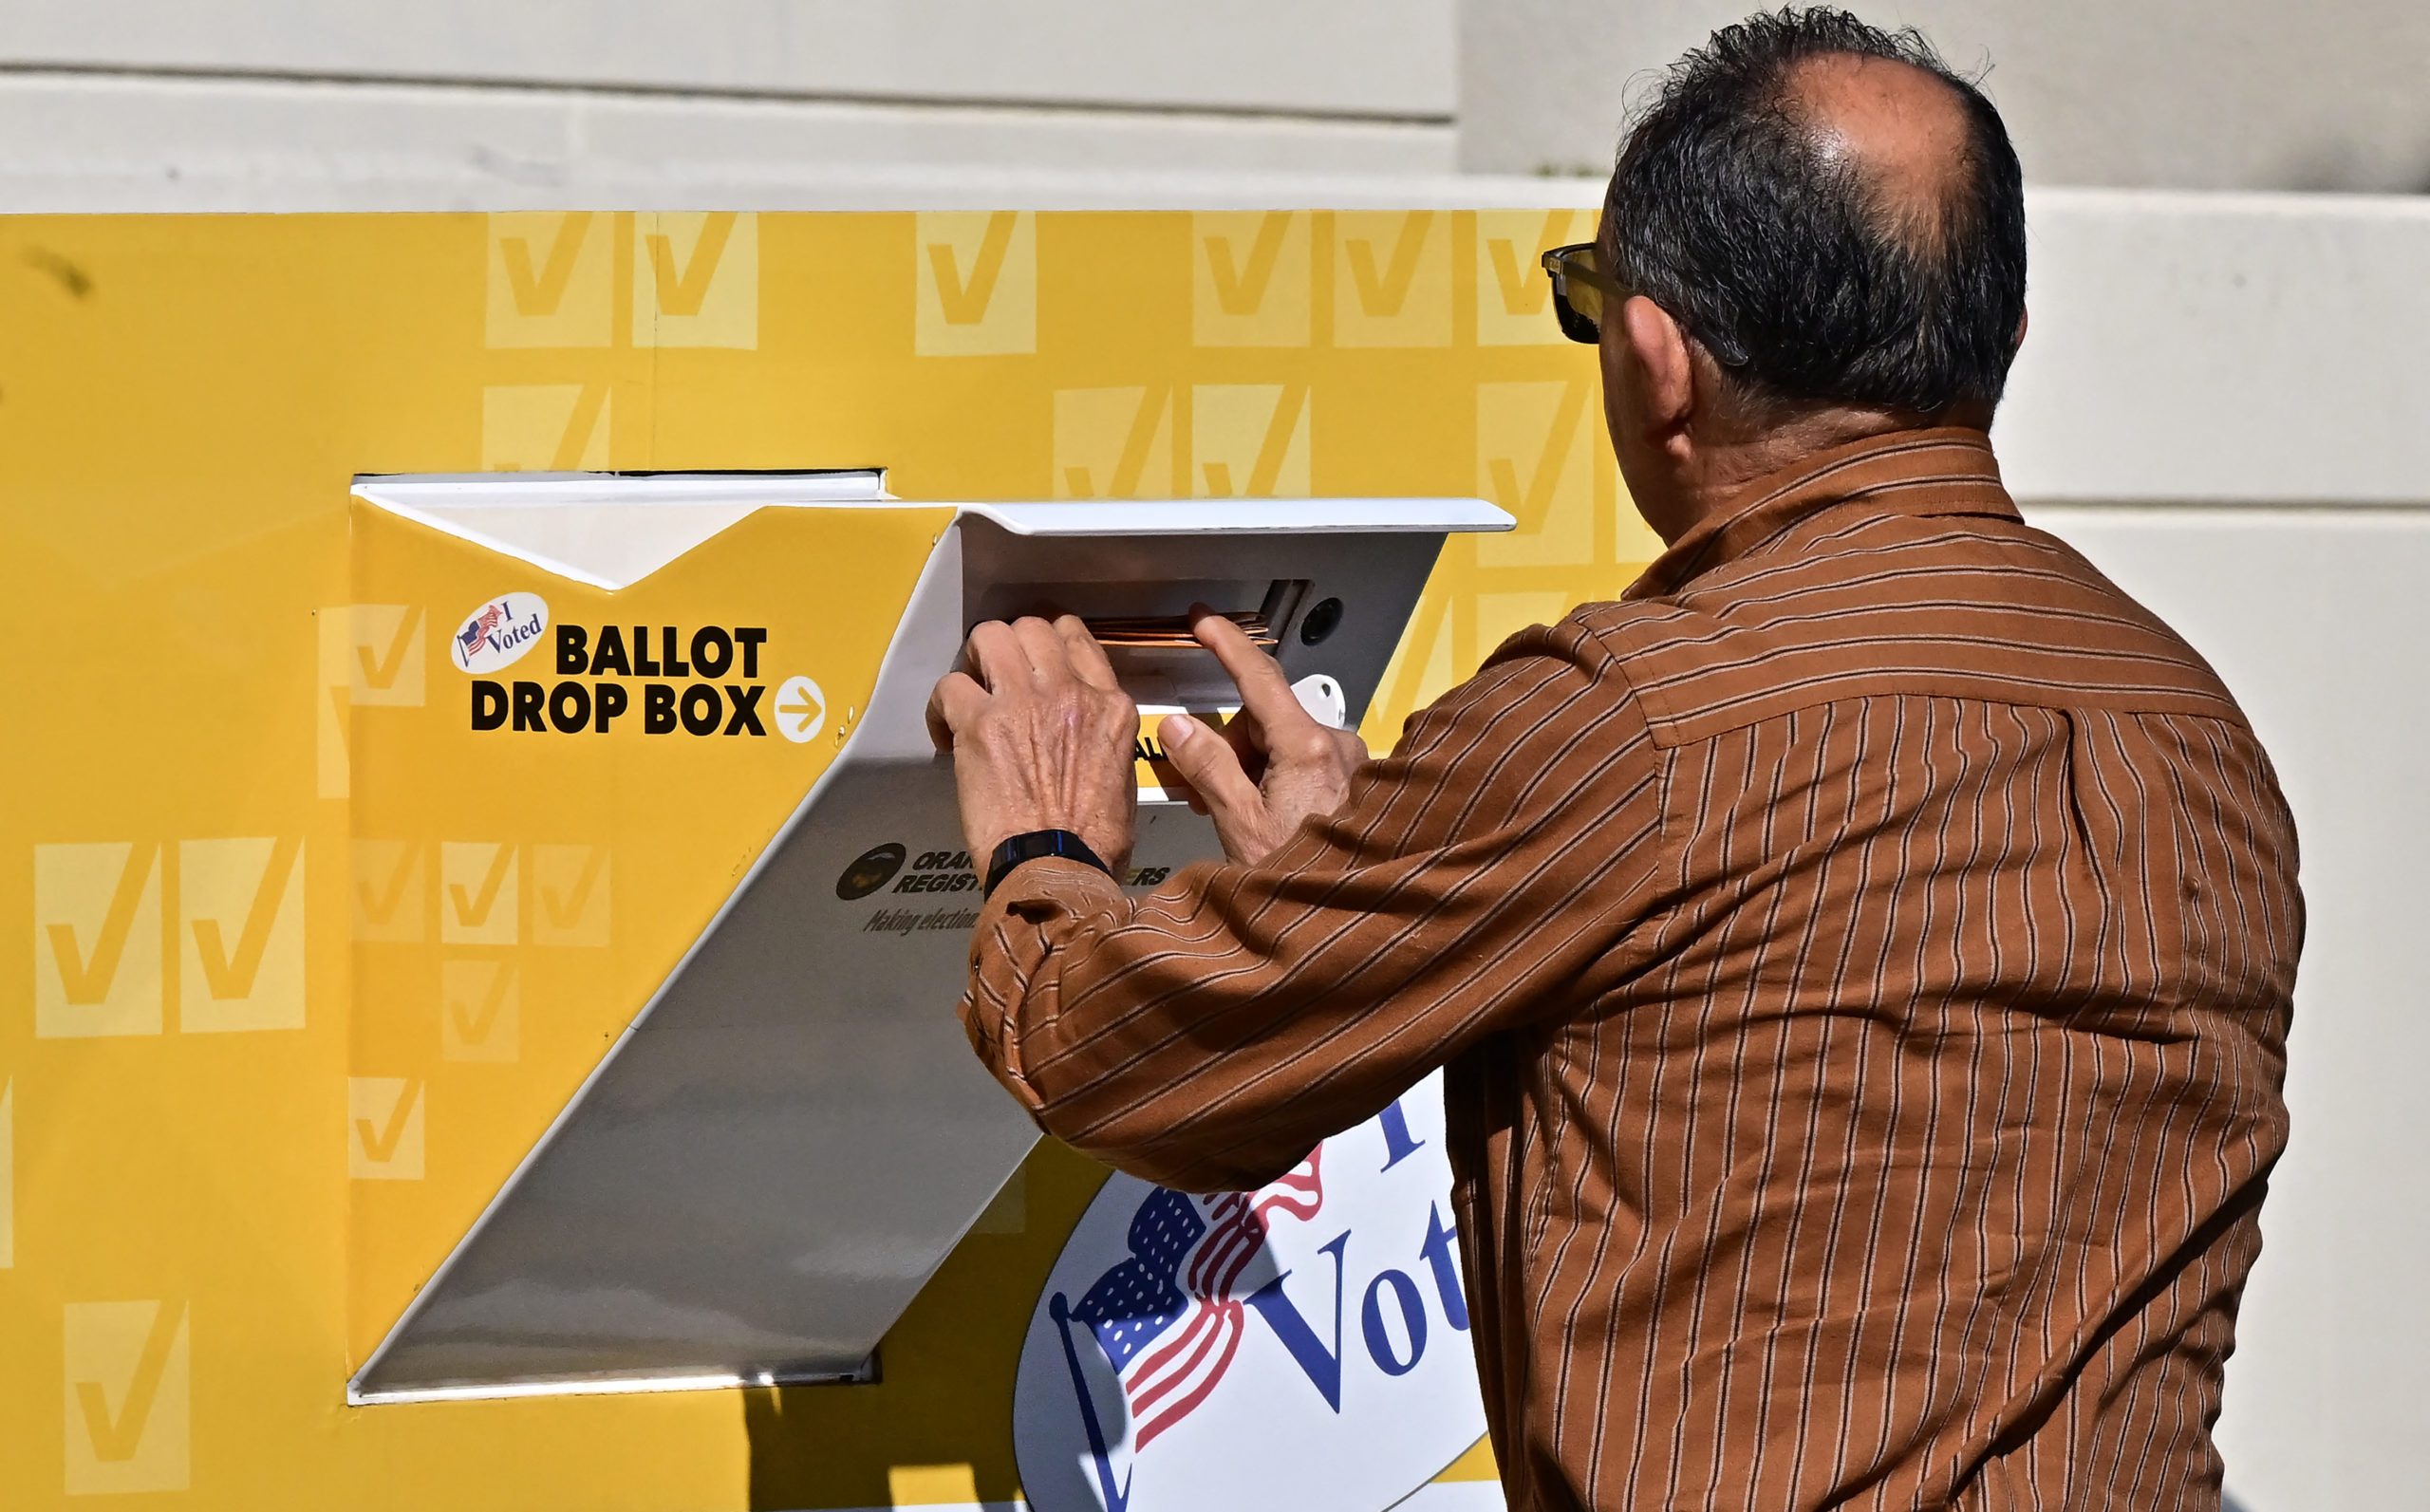 A man drops his ballot into a ballot box at the Orange County Registrar in Santa Ana, California on "Super Tuesday," March 5, 2024. (Photo by FREDERIC J. BROWN/AFP via Getty Images)